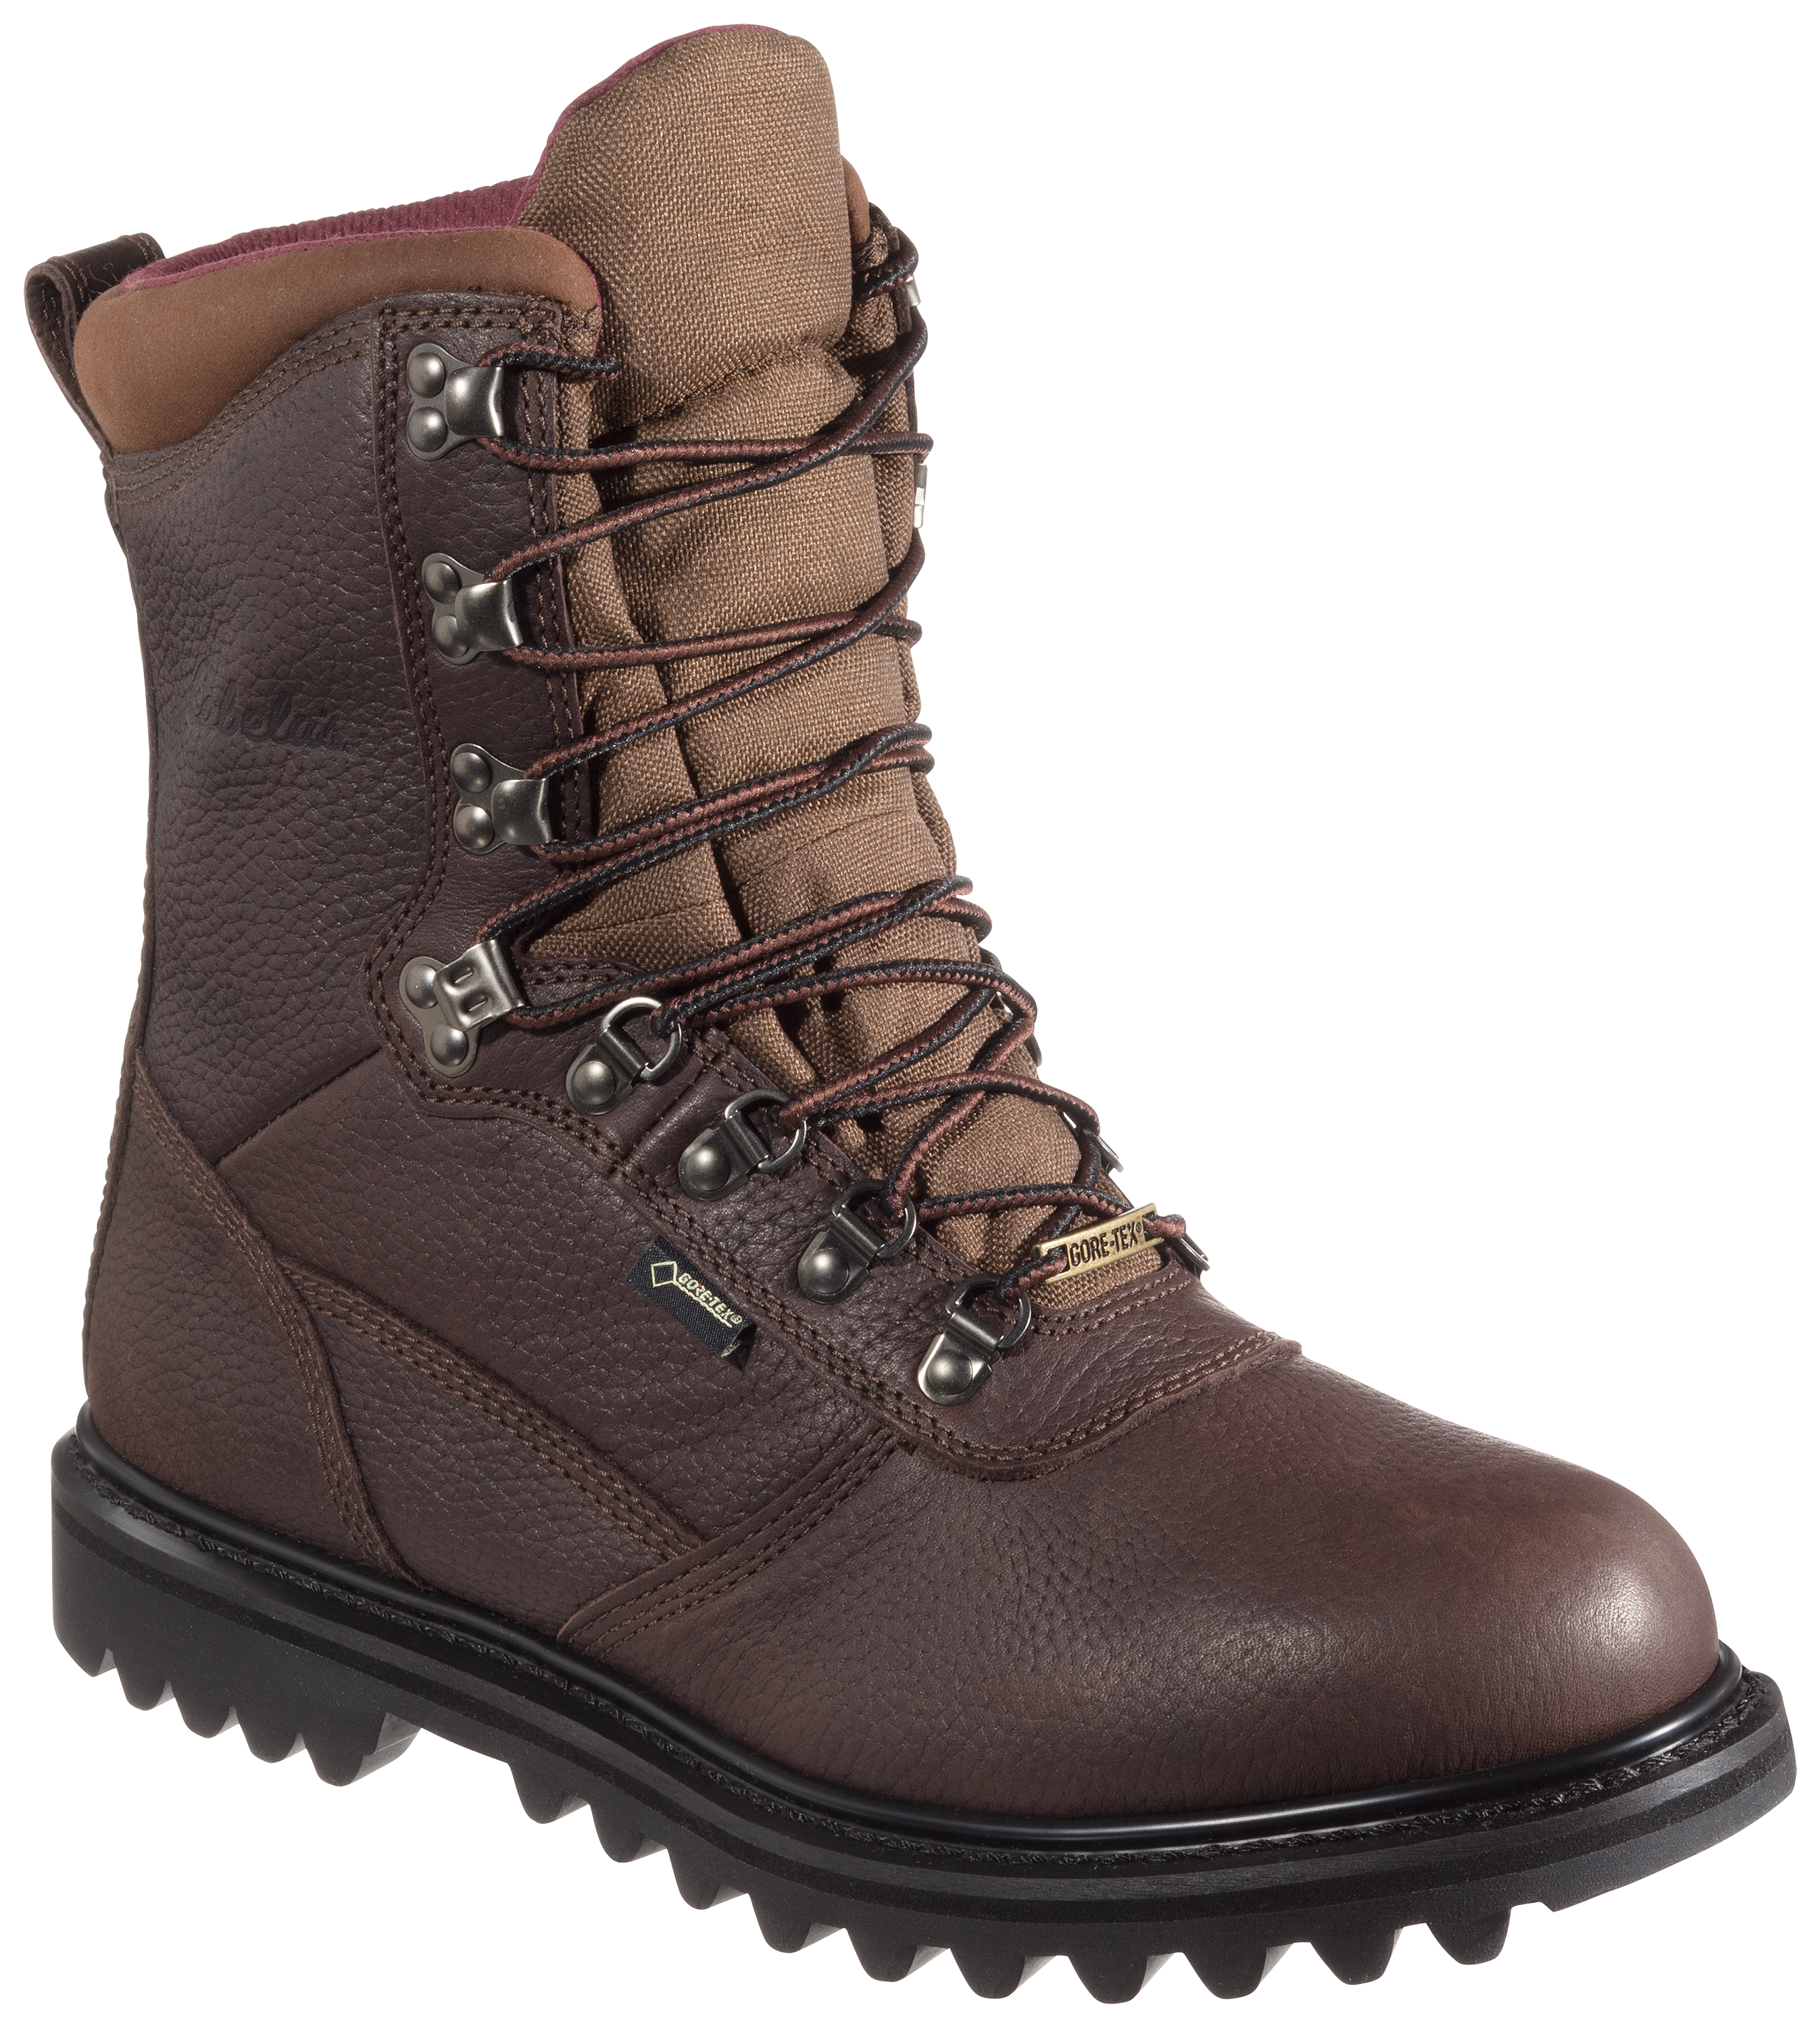 Cabela's Iron Ridge GORE-TEX Insulated Hunting Boots for Men - Brown - 9W